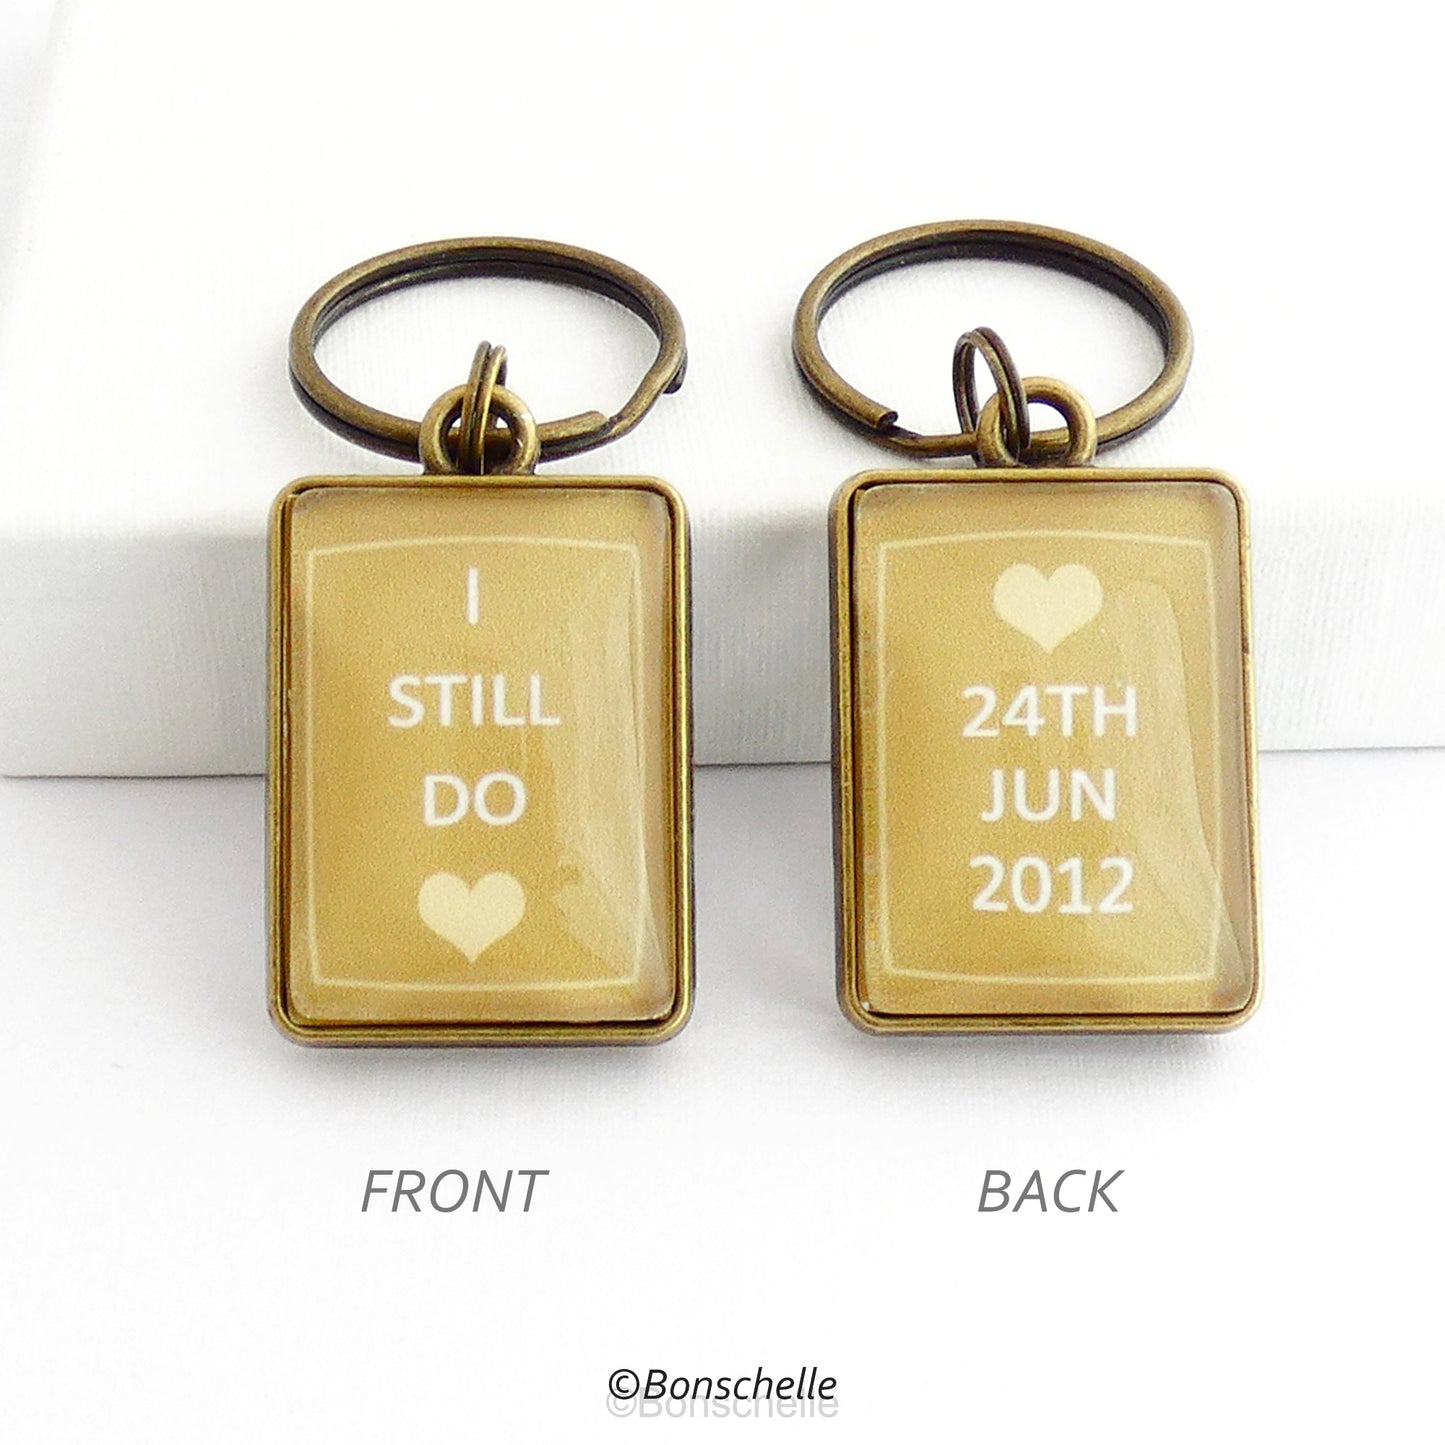 bronze toned metal and glass cabochon rectangle shape keyring for bronze anniversary with personalised date and the worlds I still do